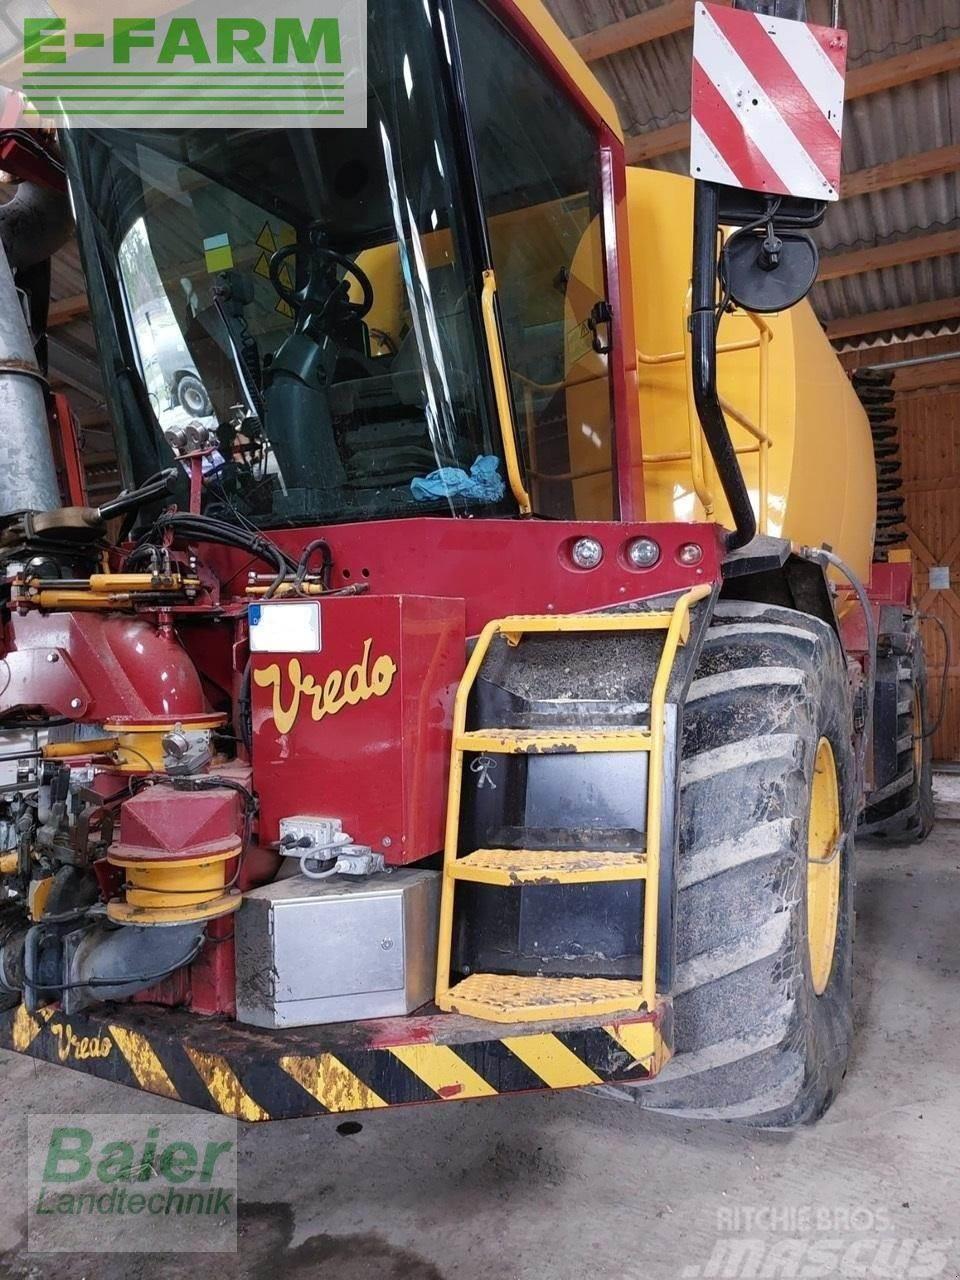 Vredo pf9000 Other fertilizing machines and accessories